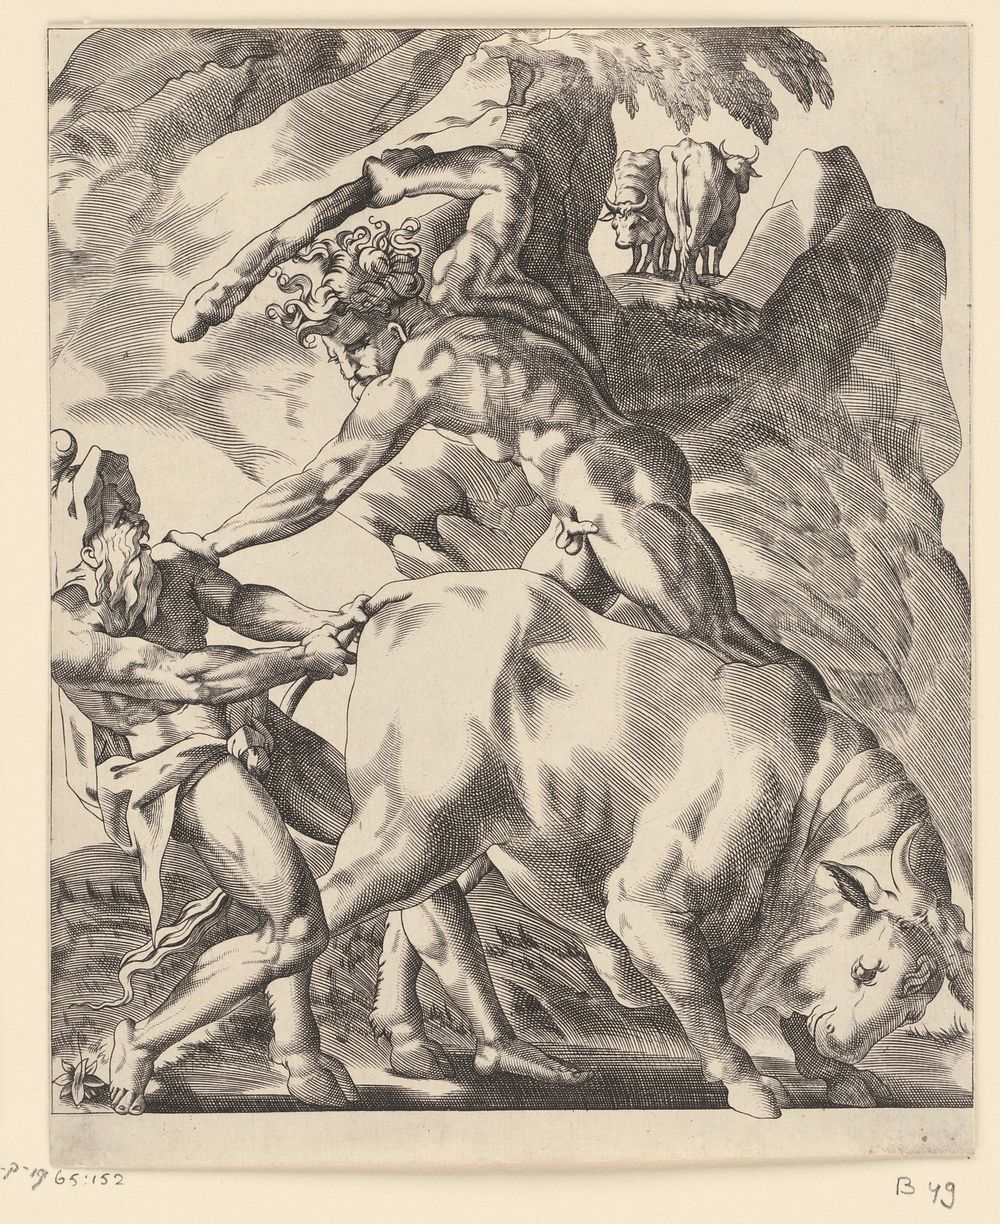 Hercules vecht met Cacus (1515 - 1565) by Giovanni Jacopo Caraglio and Rosso Fiorentino